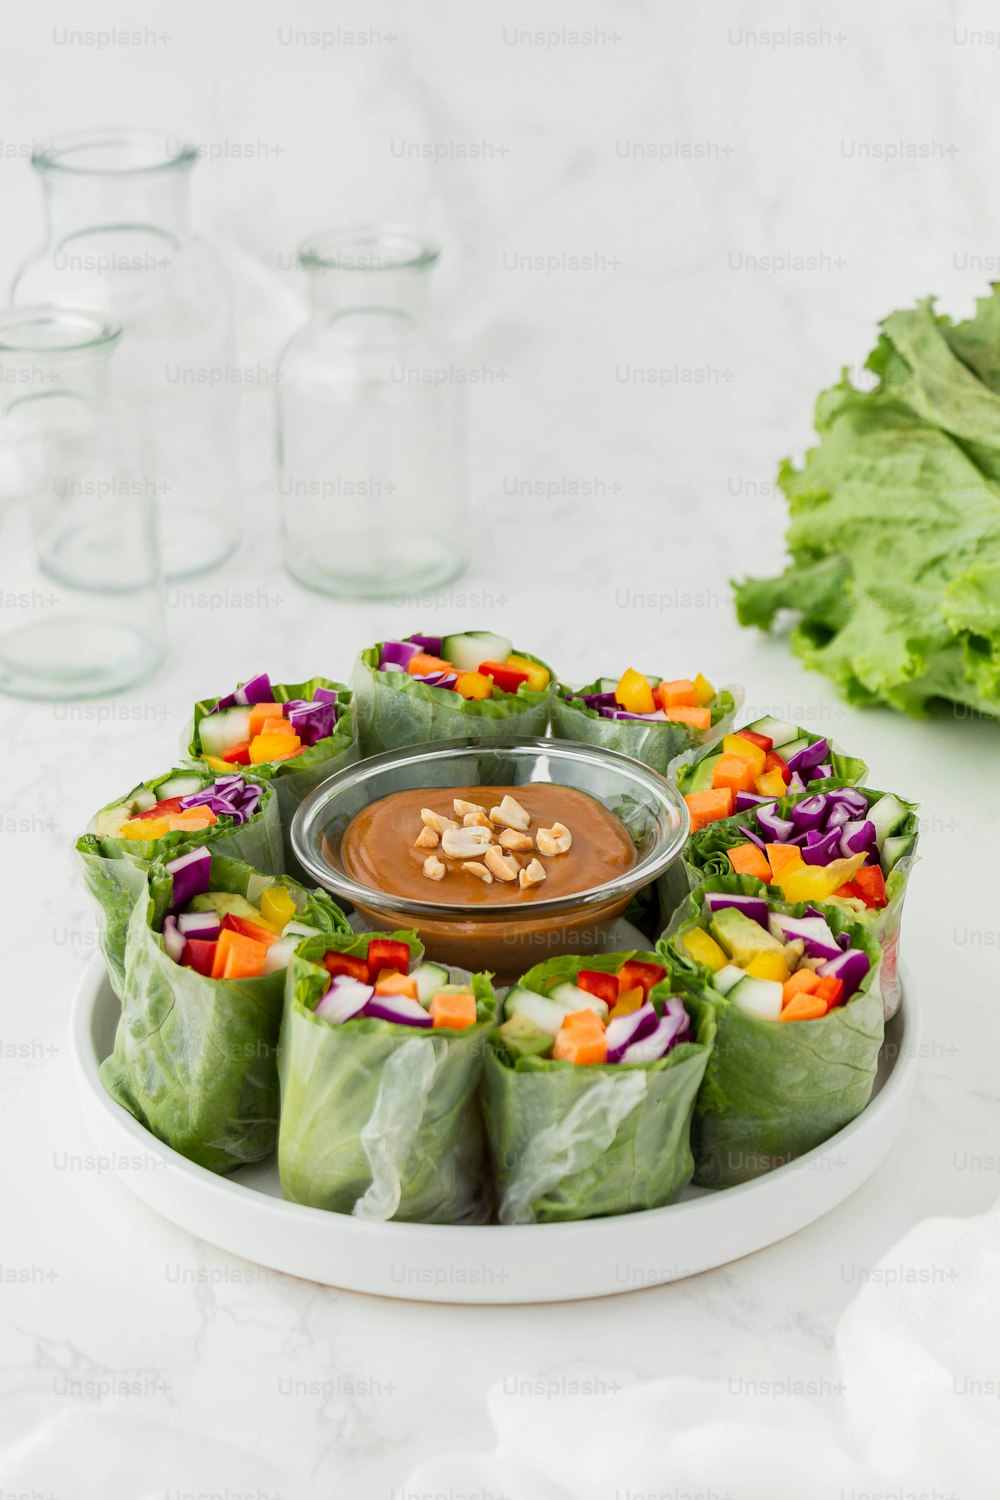 a plate of food with lettuce, carrots, and a dipping sauce